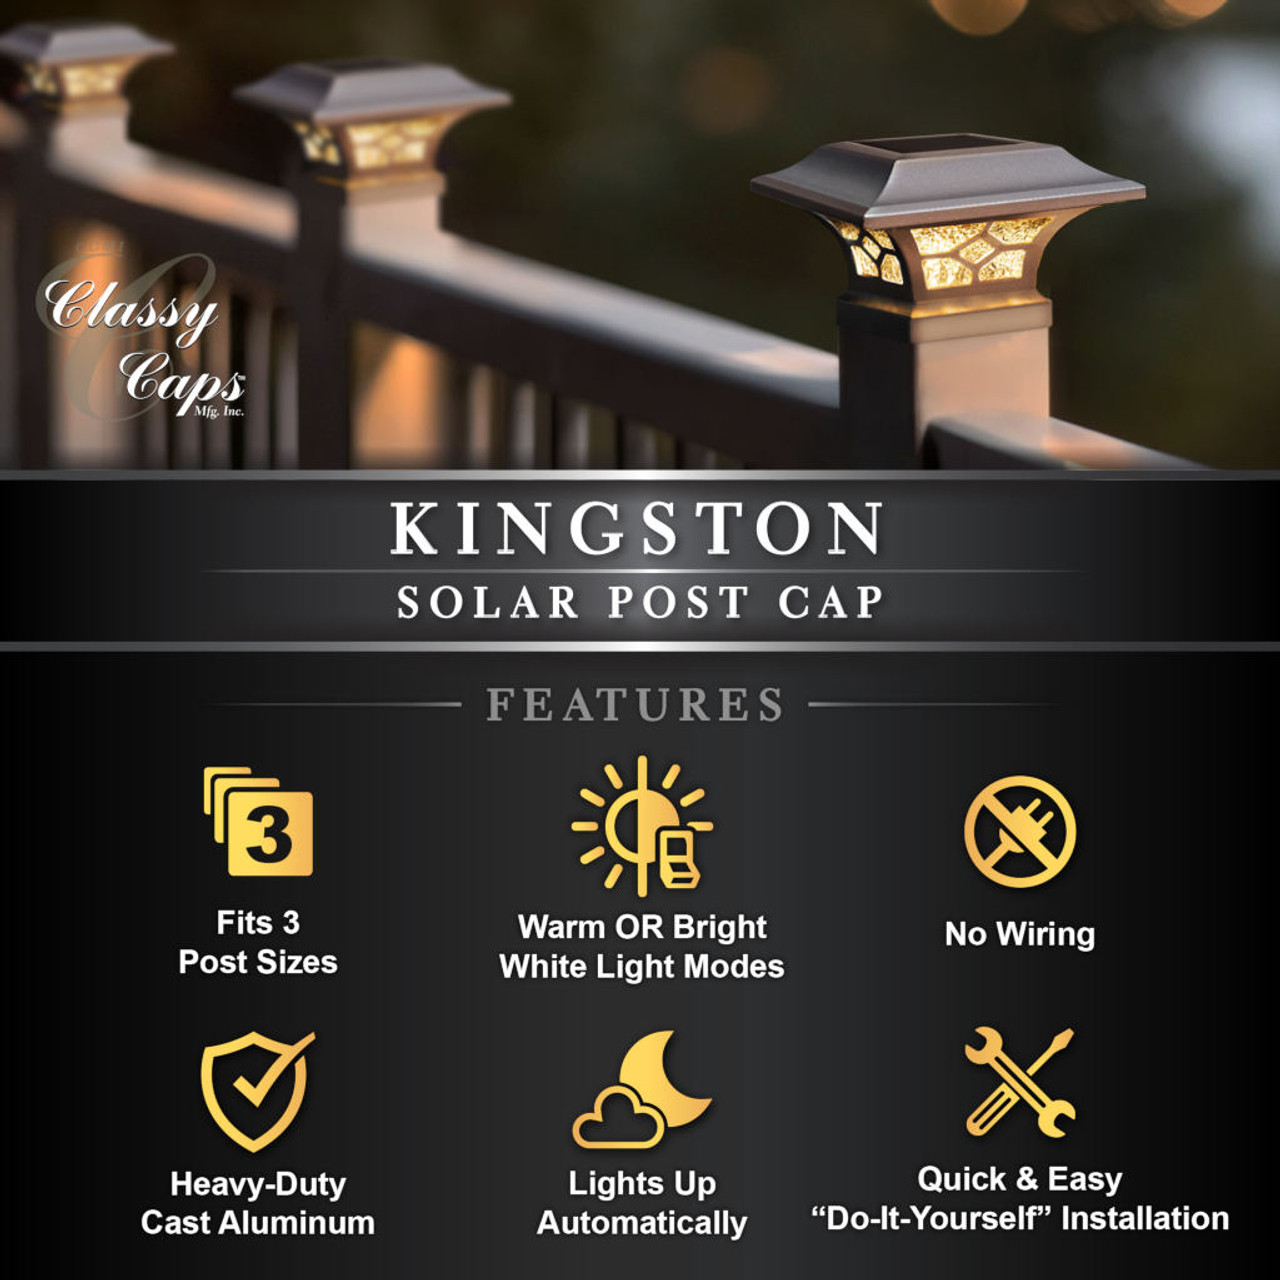 Classy Caps White Kingston Dual Lighted Solar Post Cap - Features